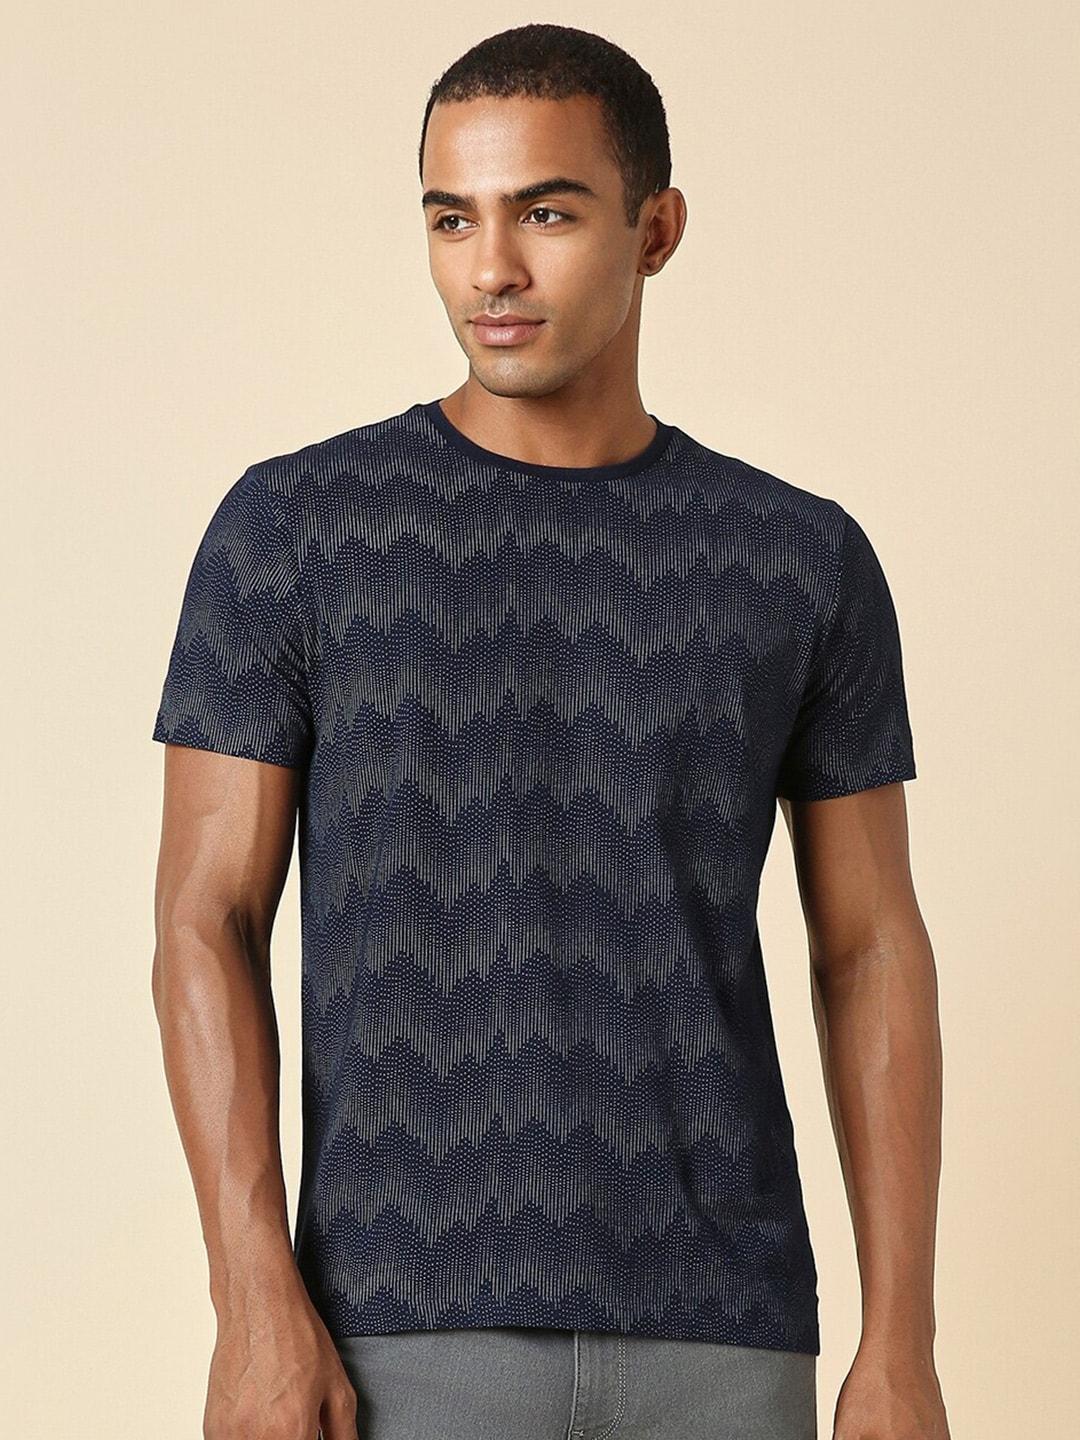 allen solly geometric printed pure cotton slim fit t-shirt